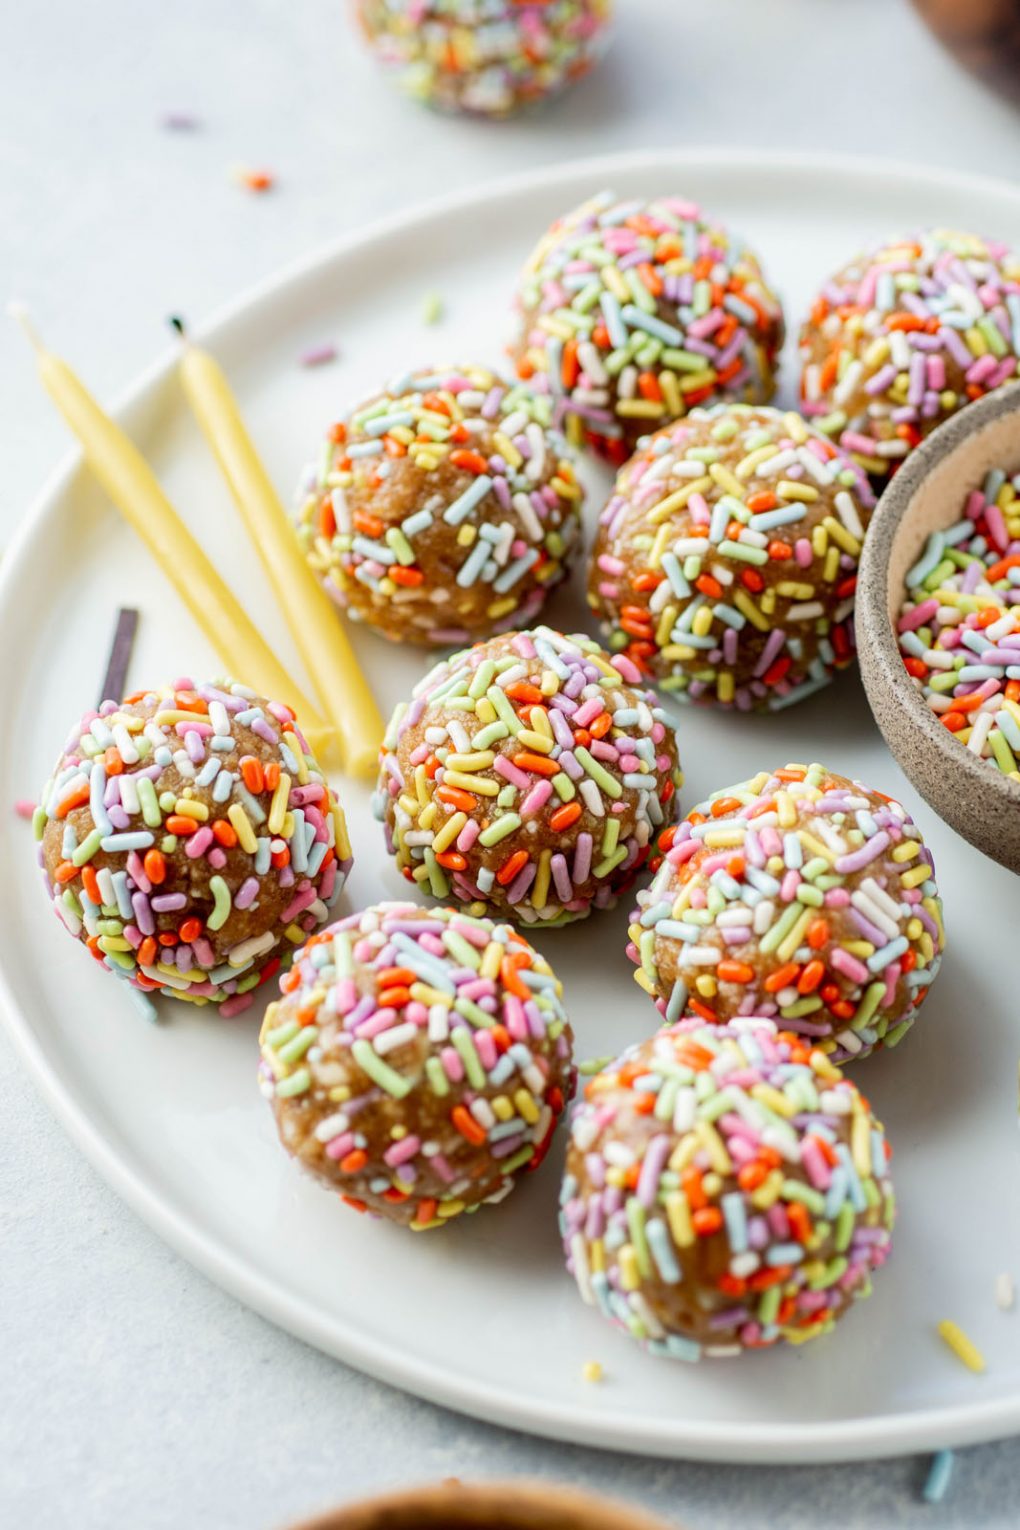 Side angle shot of energy bites coated in rainbow sprinkles on a white plate and white background, next to some beeswax birthday candles and scattered sprinkles.